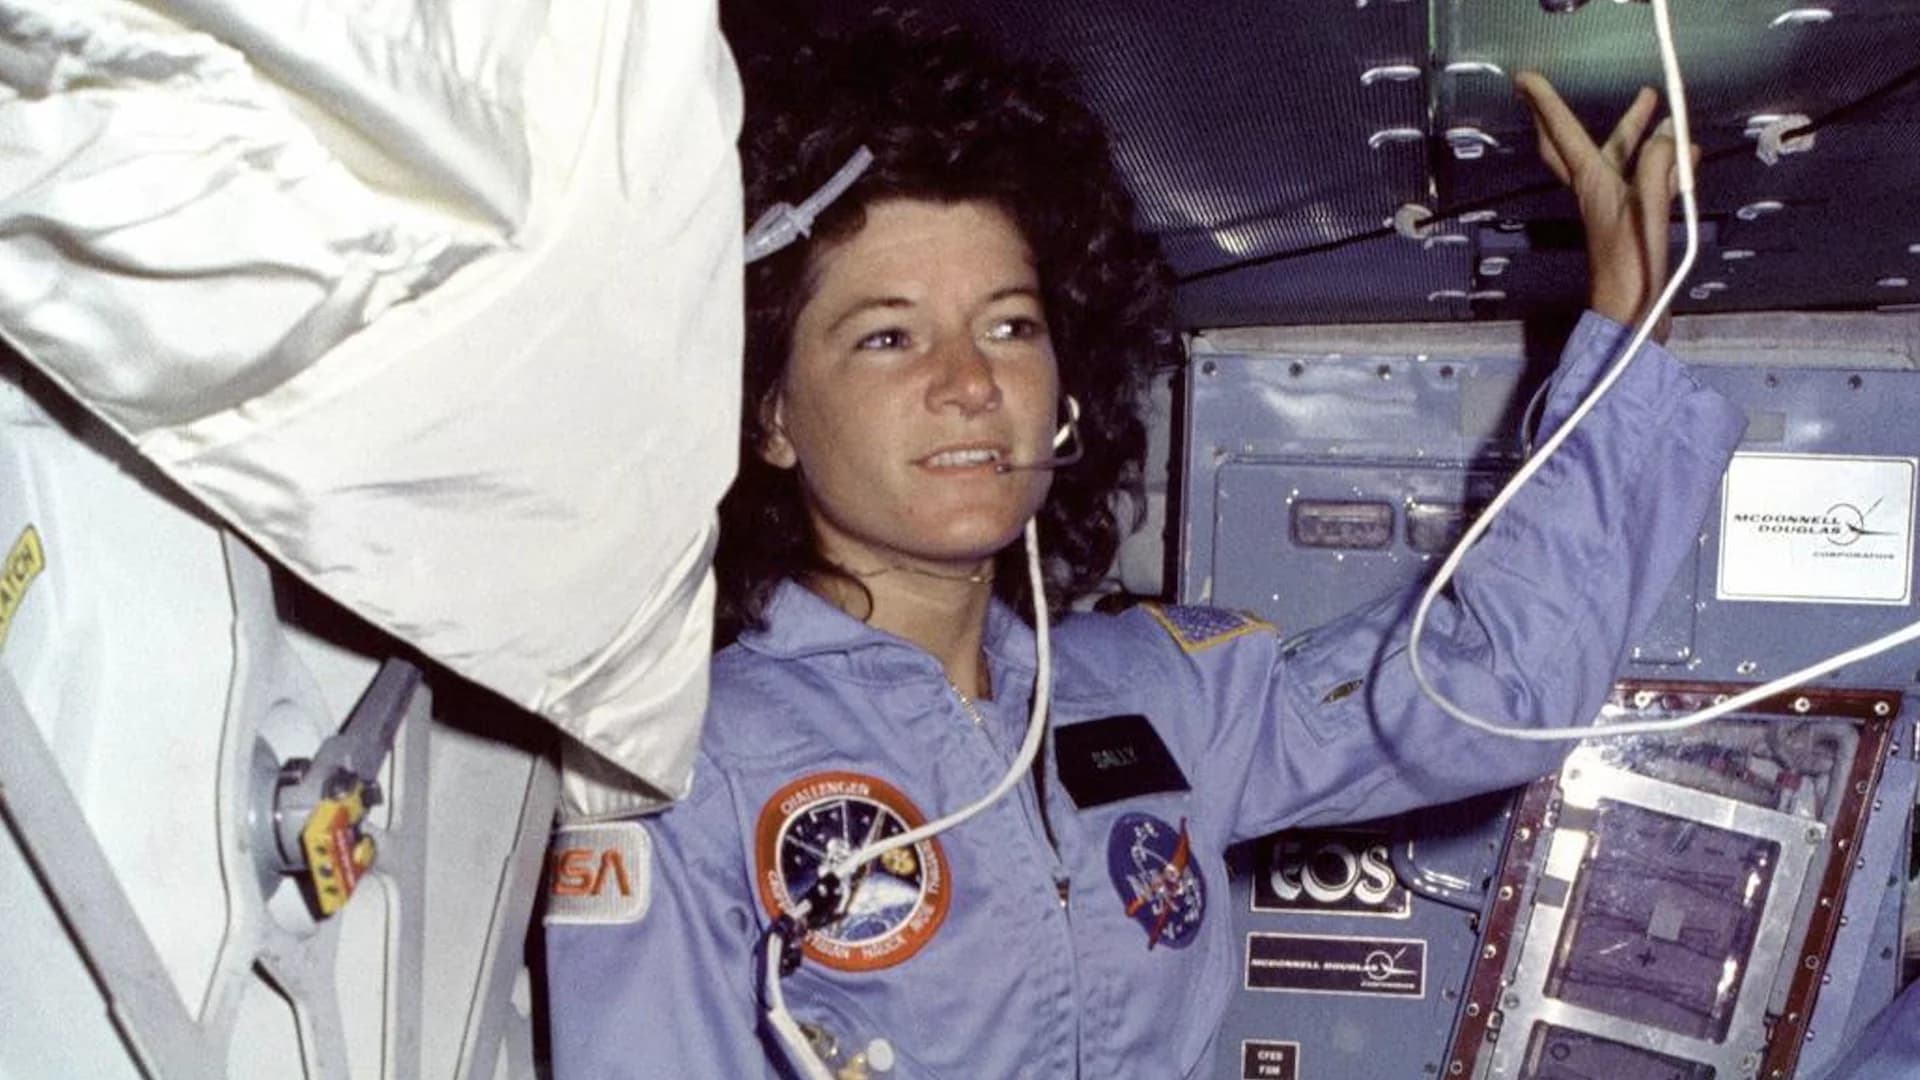 Cradle of Aviation to unveil sculpture dedicated to space pioneer Sally Ride